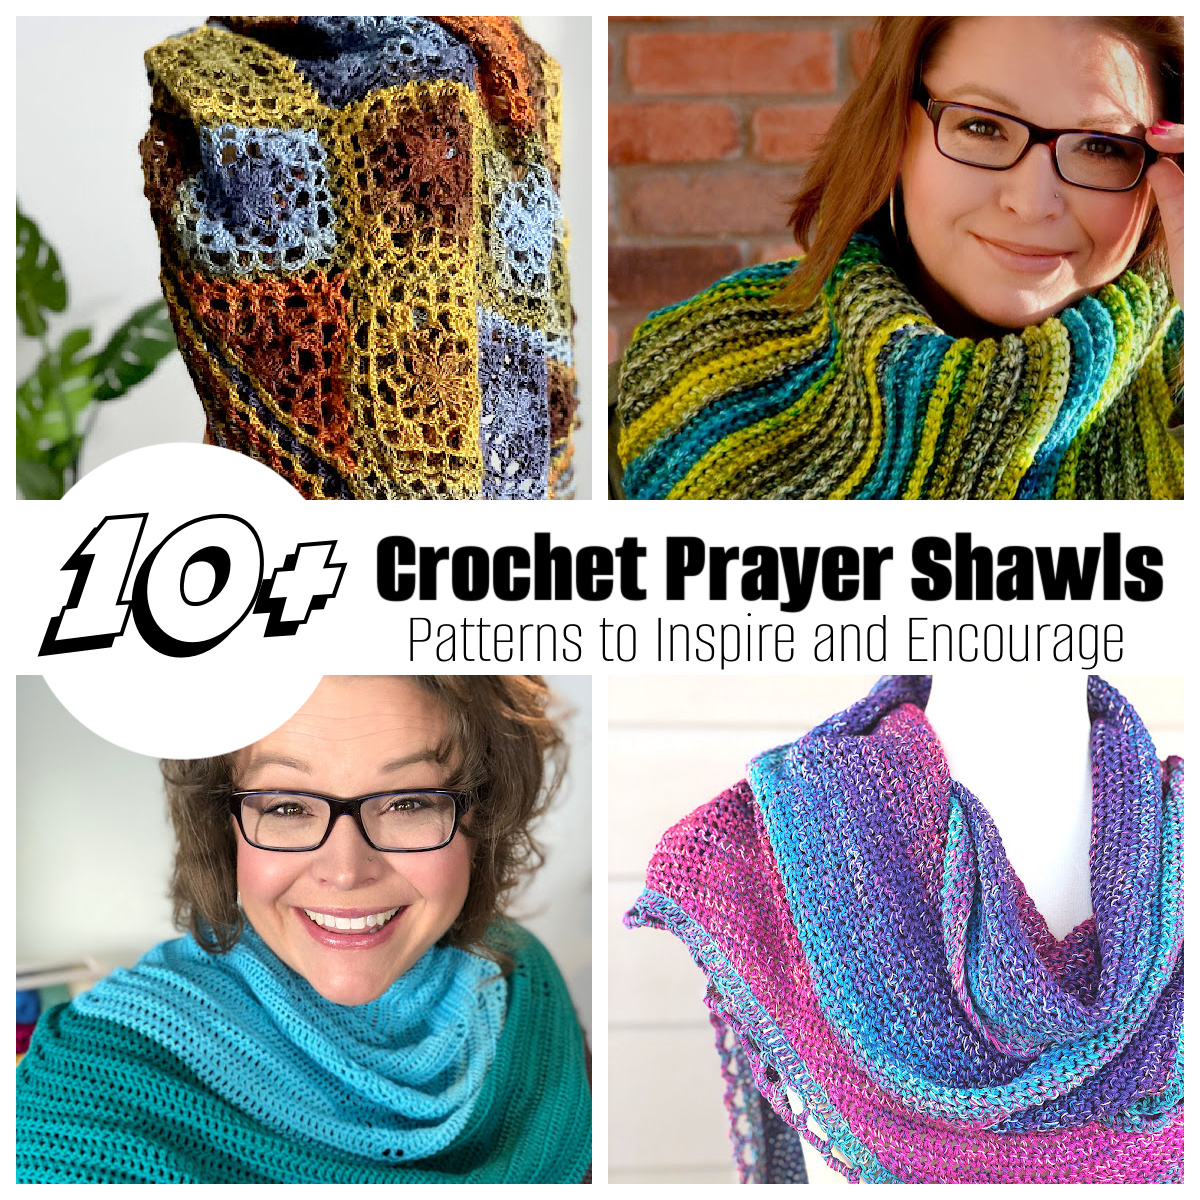 Roundup: 14 Free Crochet Patterns for Comfort and Prayer Shawls